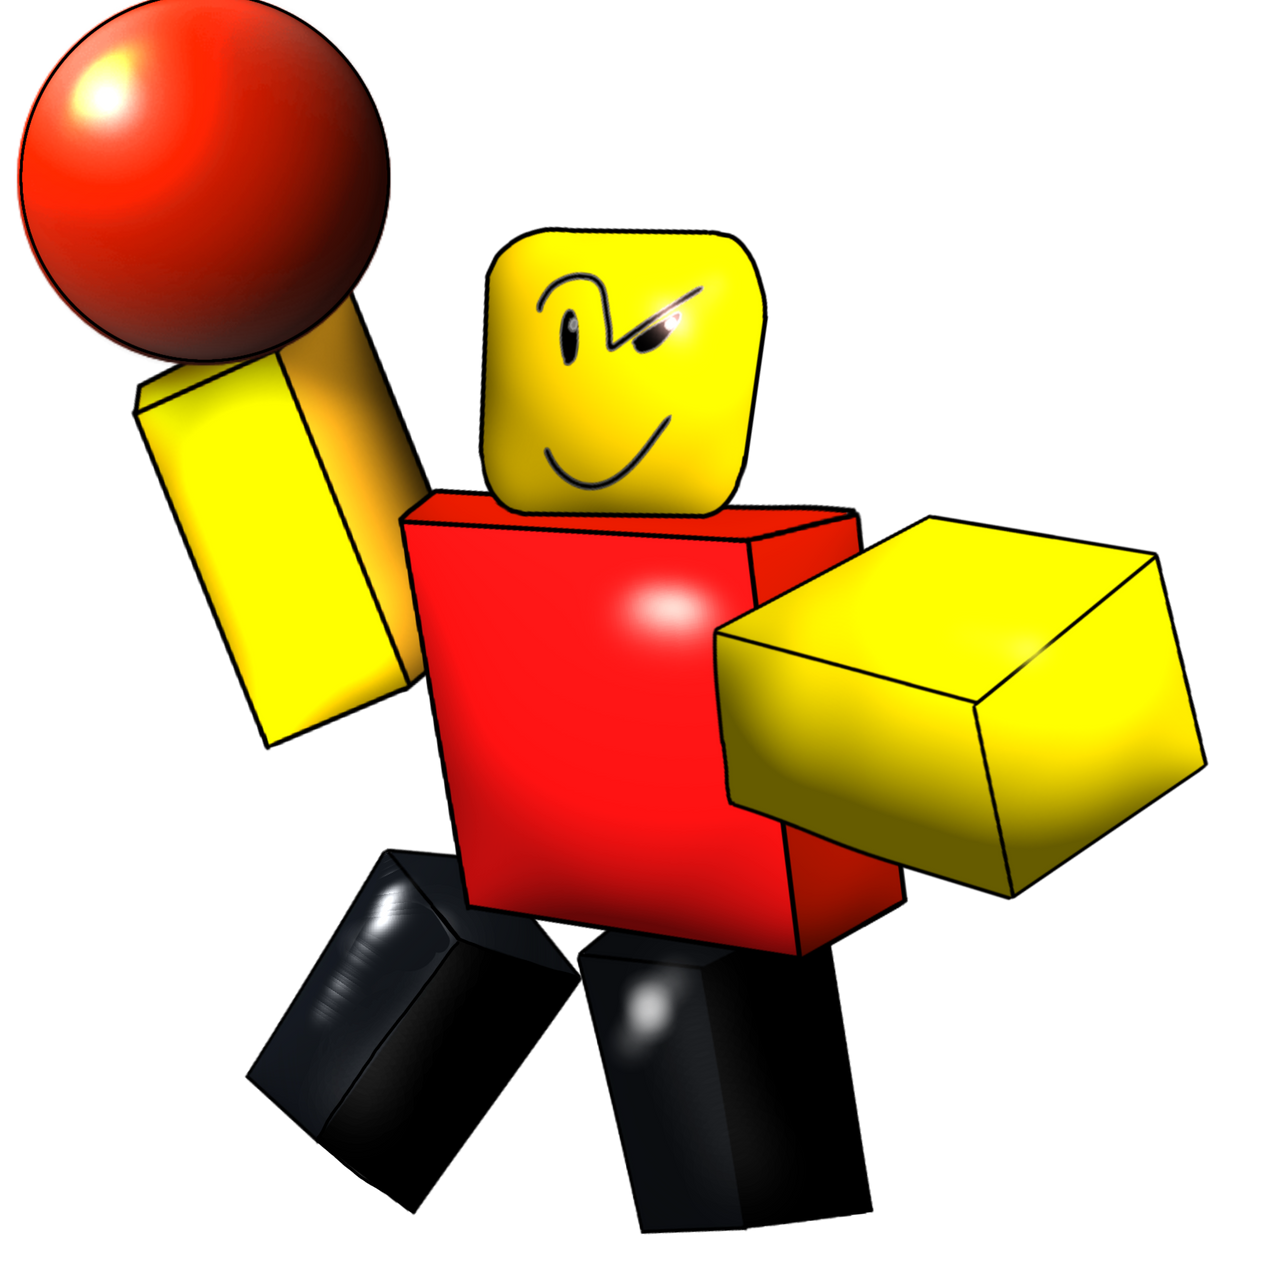 Free to use baller from bfs roblox by pixib00p on DeviantArt